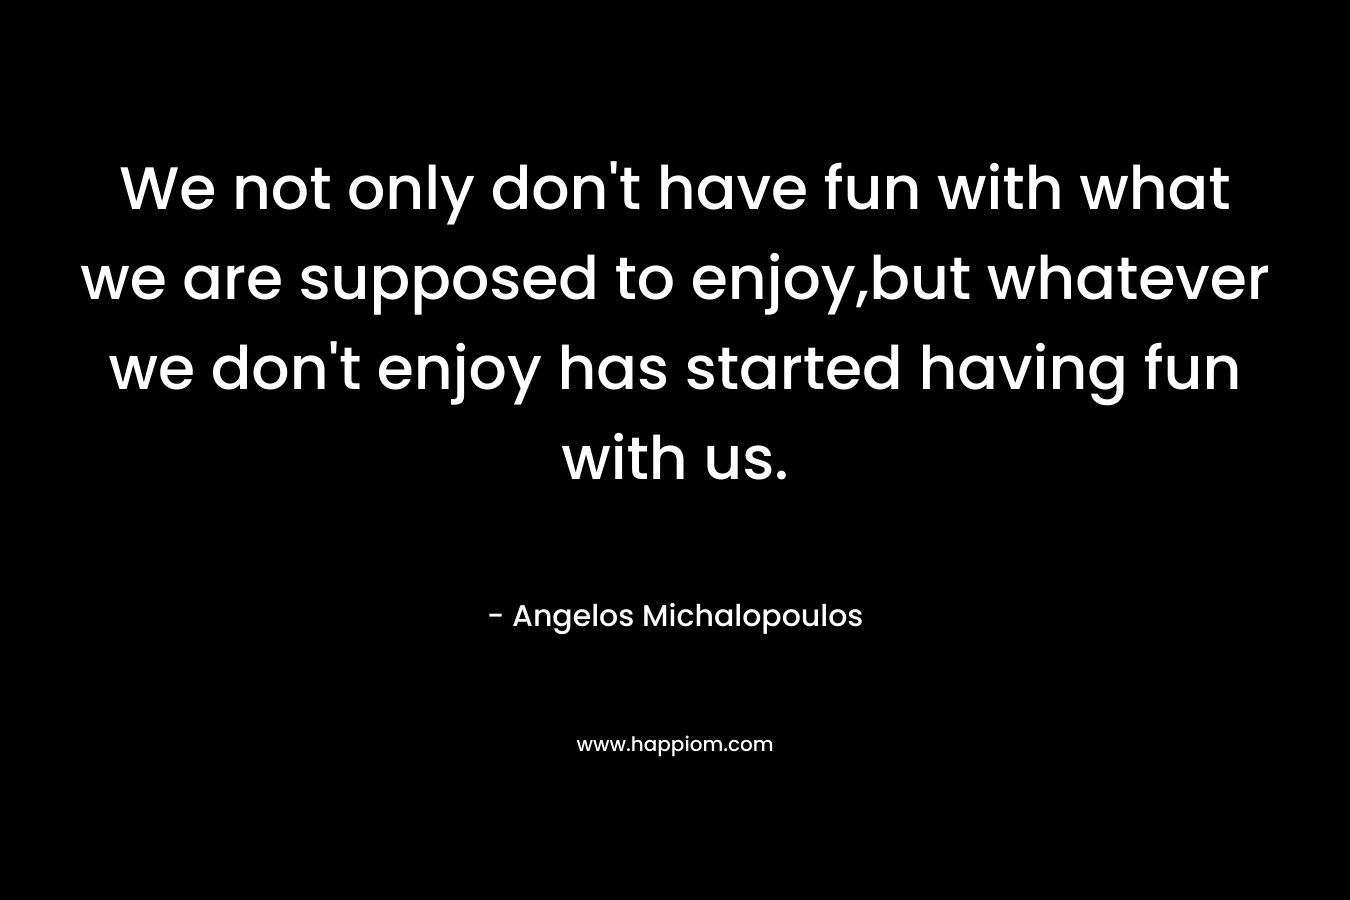 We not only don’t have fun with what we are supposed to enjoy,but whatever we don’t enjoy has started having fun with us. – Angelos Michalopoulos